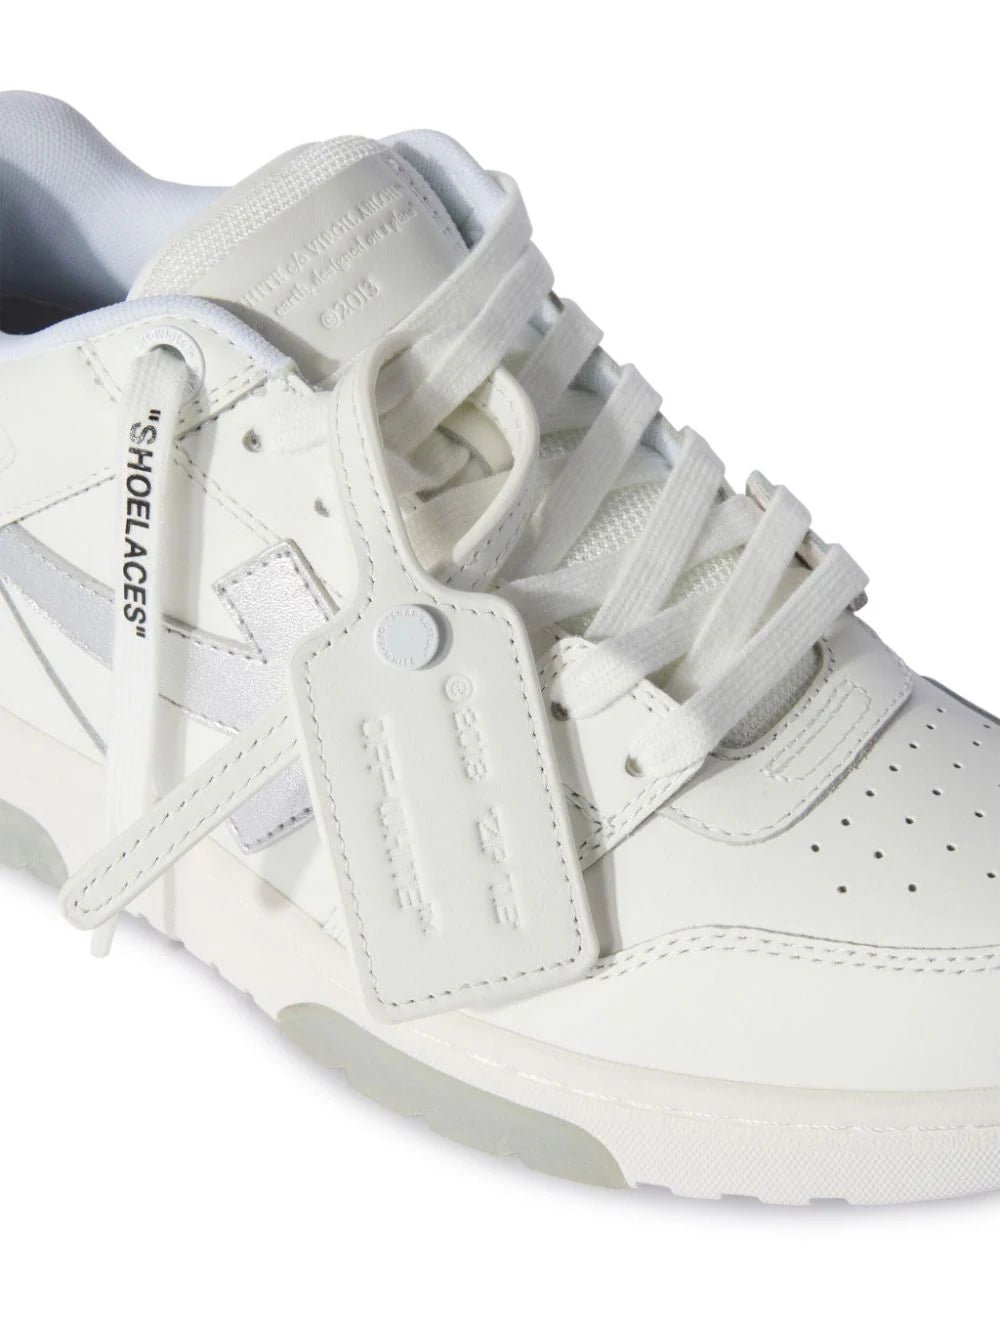 OFF-WHITE WOMEN Out Of Office Calf Leather Sneakers White/Silver - MAISONDEFASHION.COM